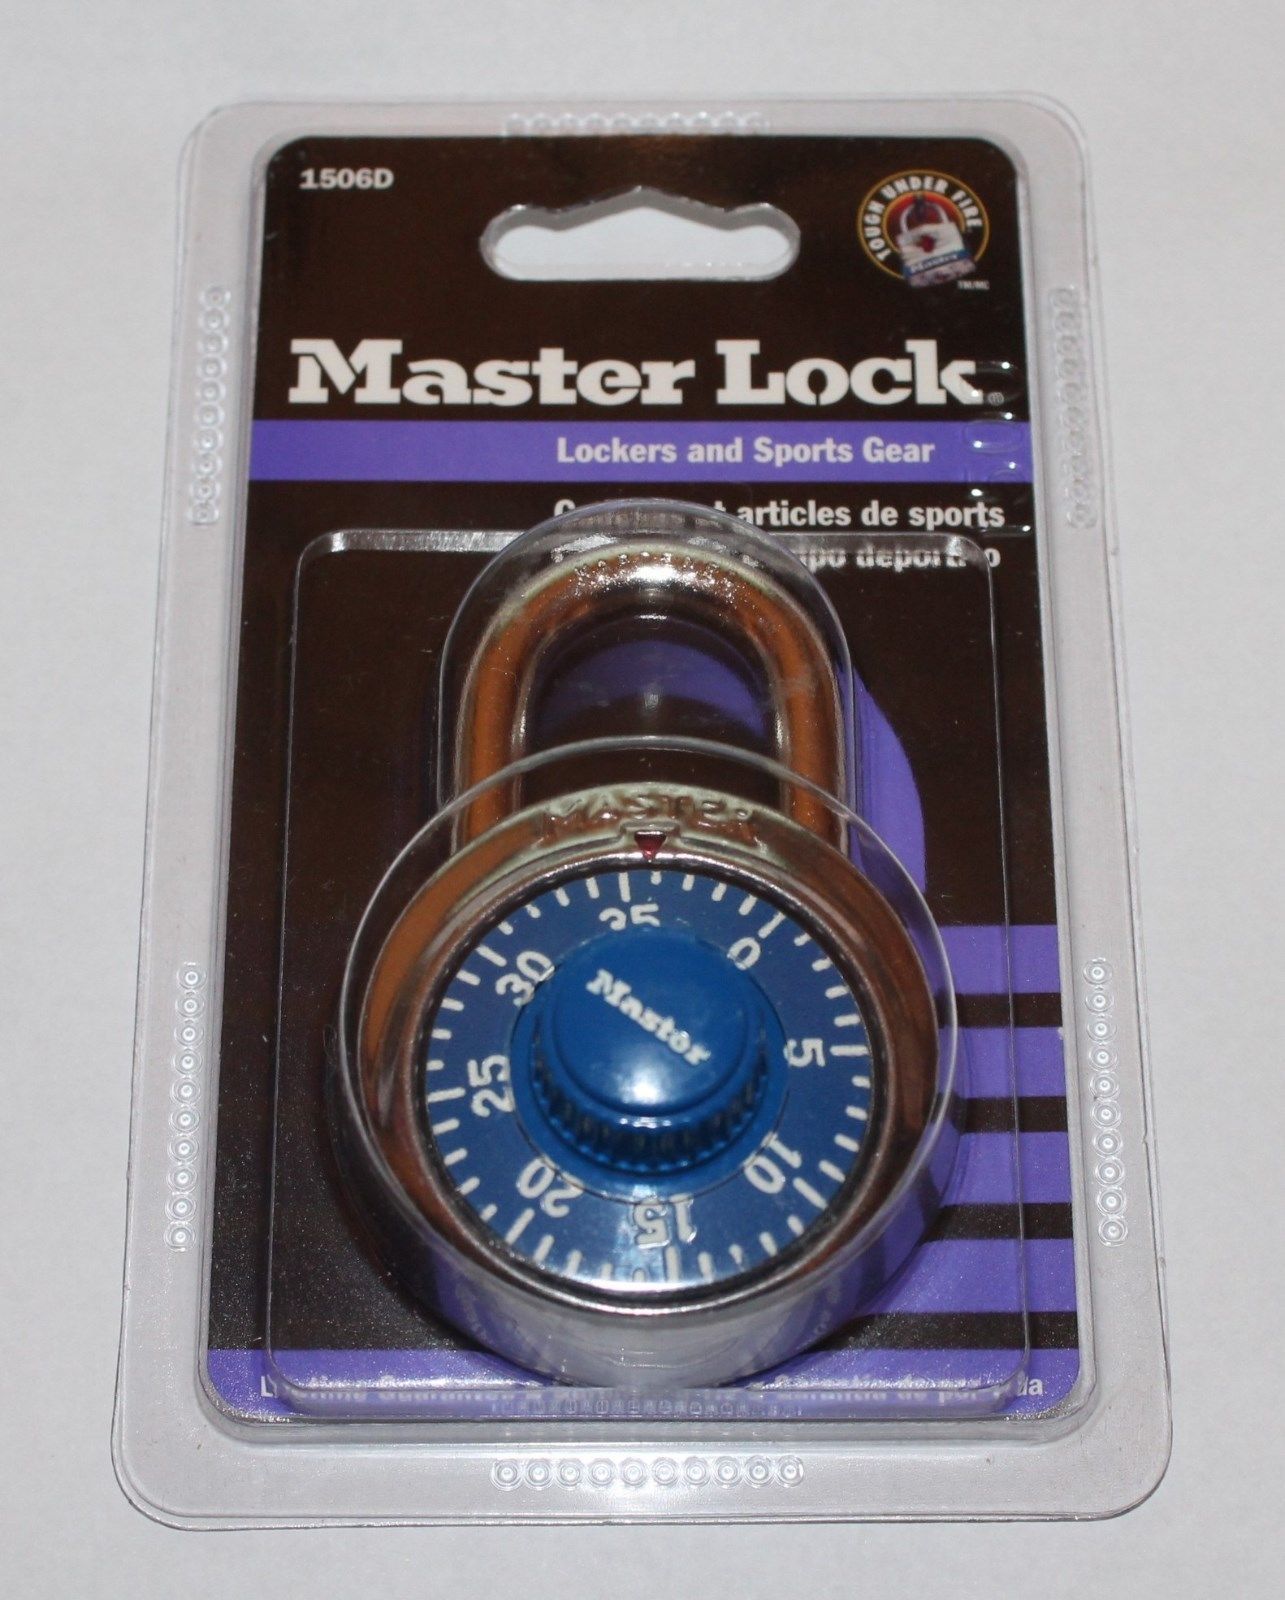 New Master Lock Combination for Lockers and Sports Gear